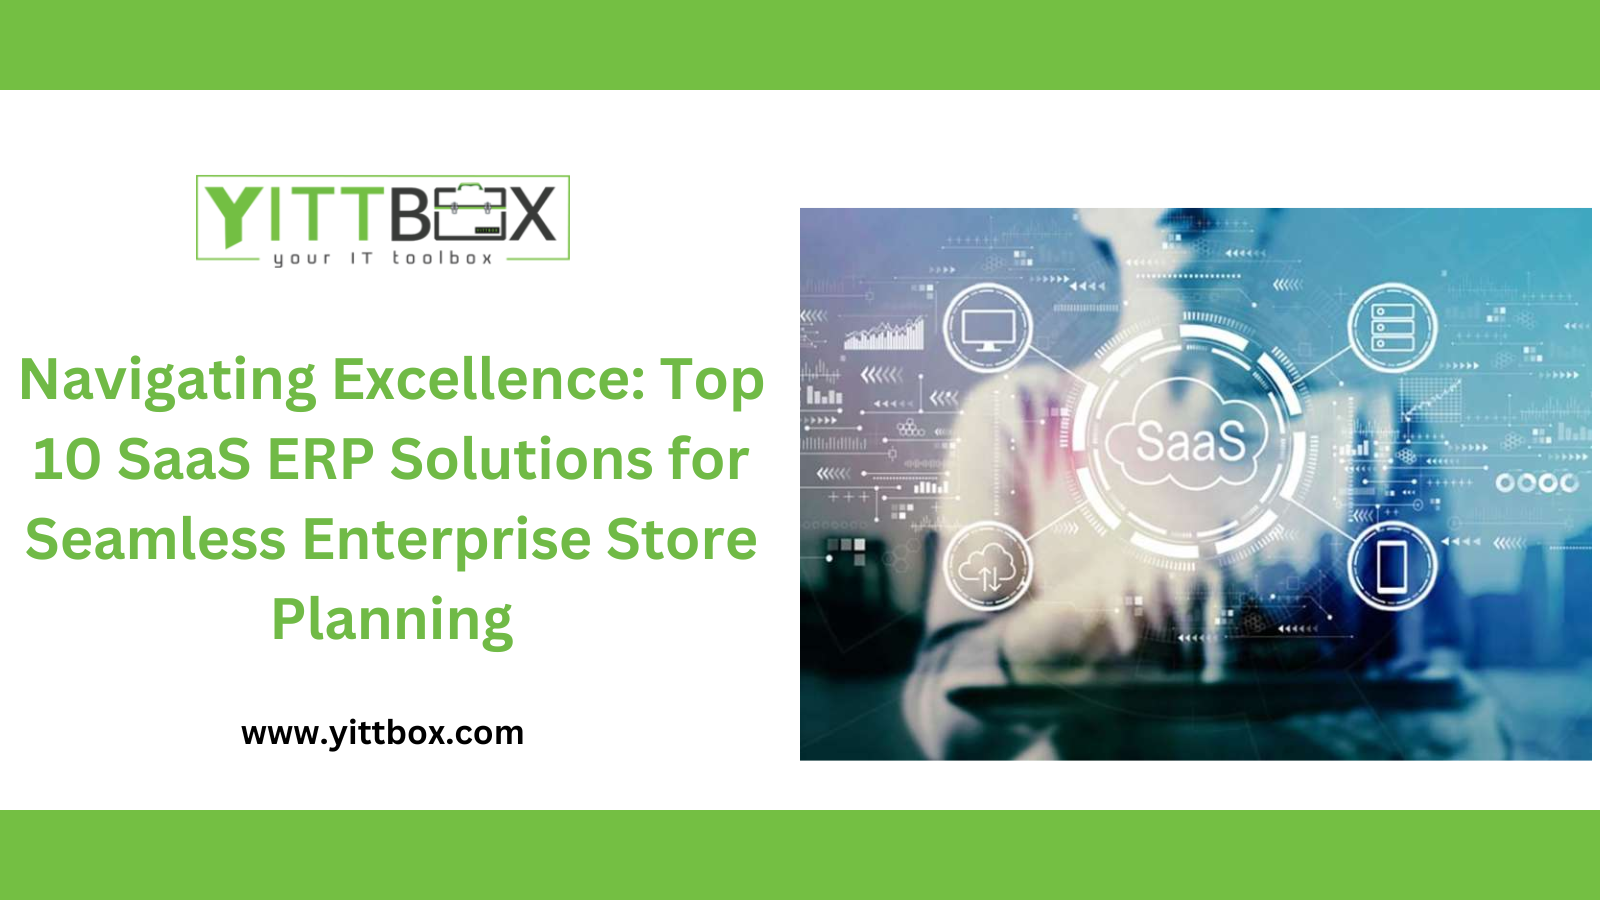 Navigating Excellence: Top 10 SaaS ERP Solutions for Seamless Enterprise Store Planning